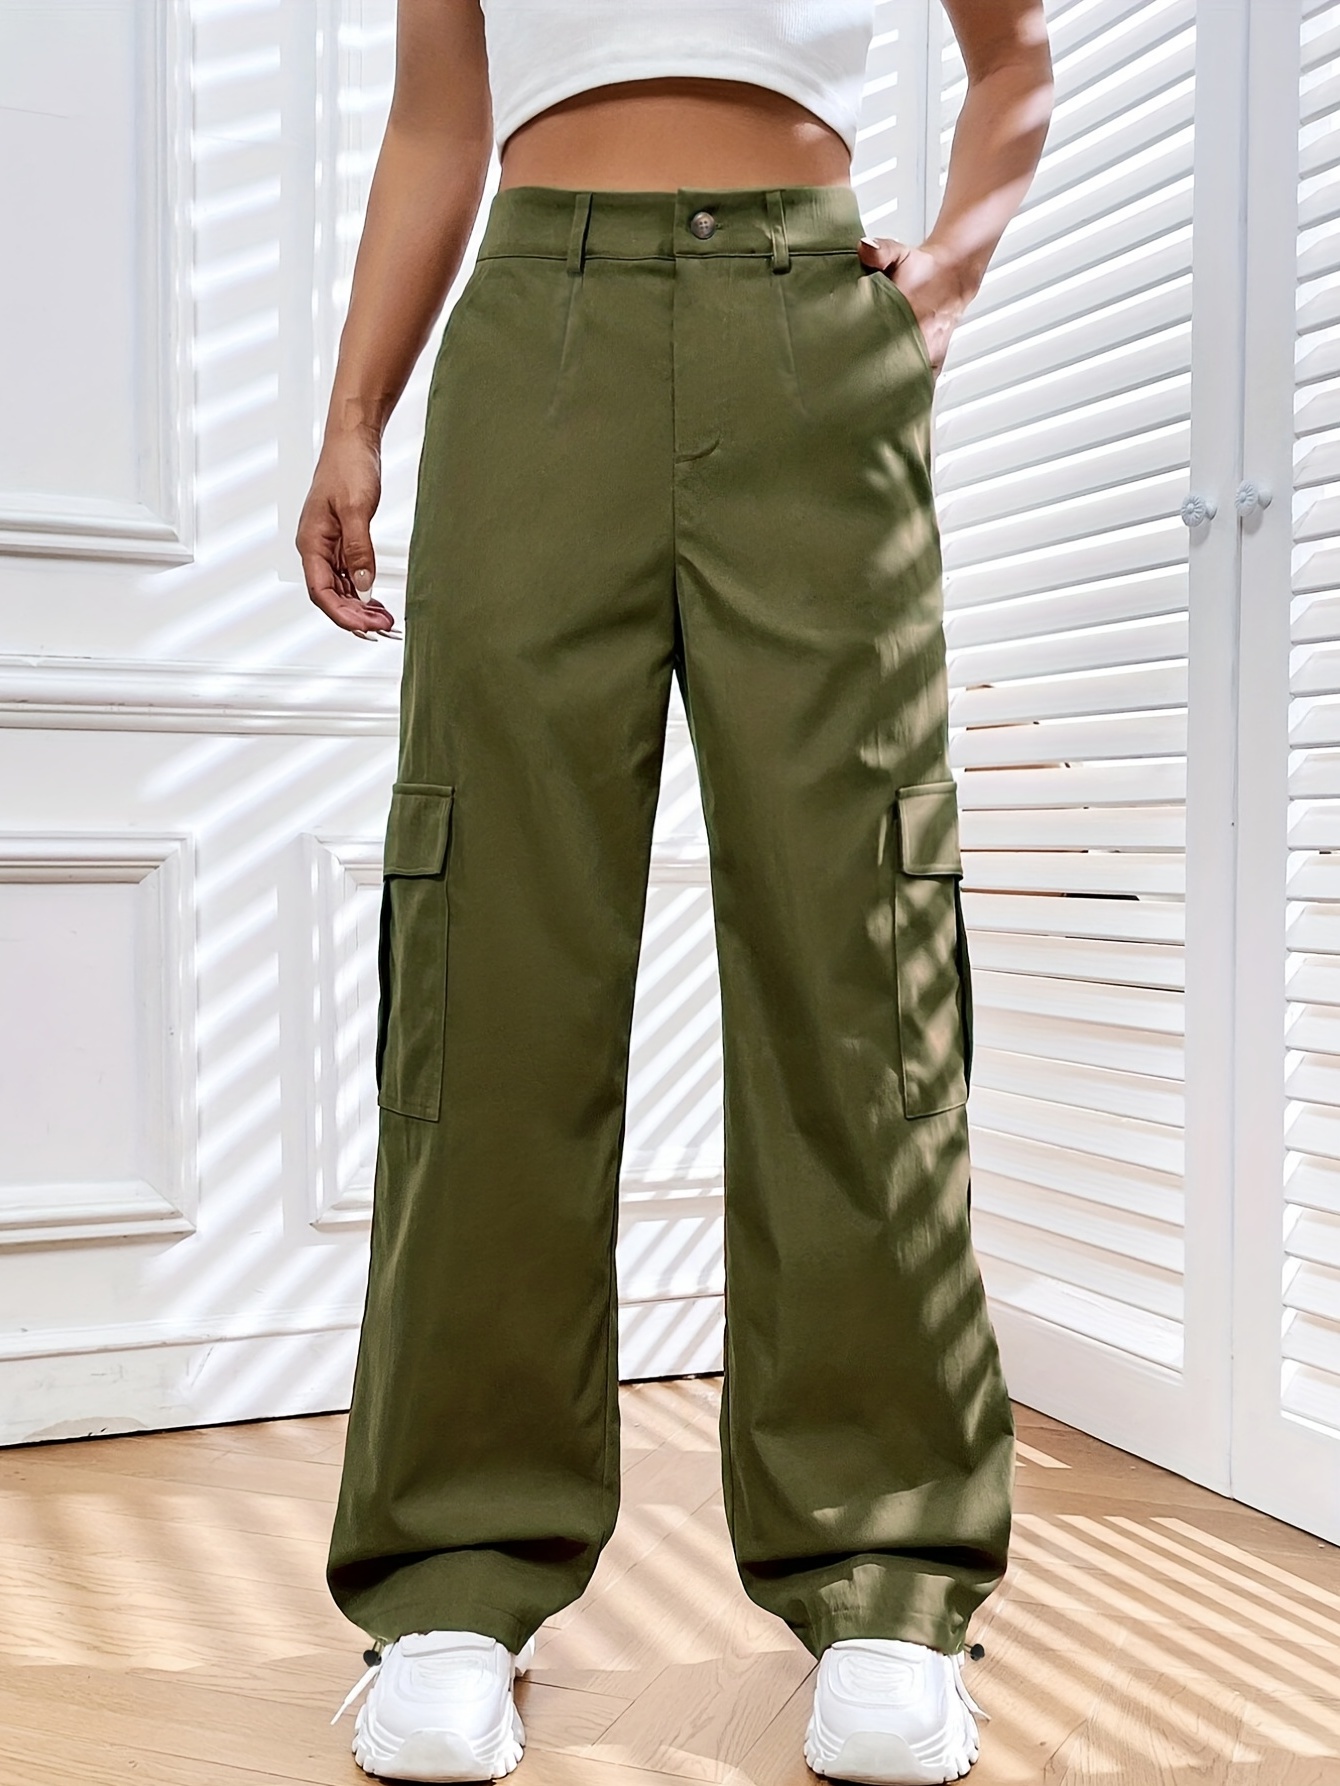 Tdoqot Women's Cargo Pants- Fashion Casual with Pockets High